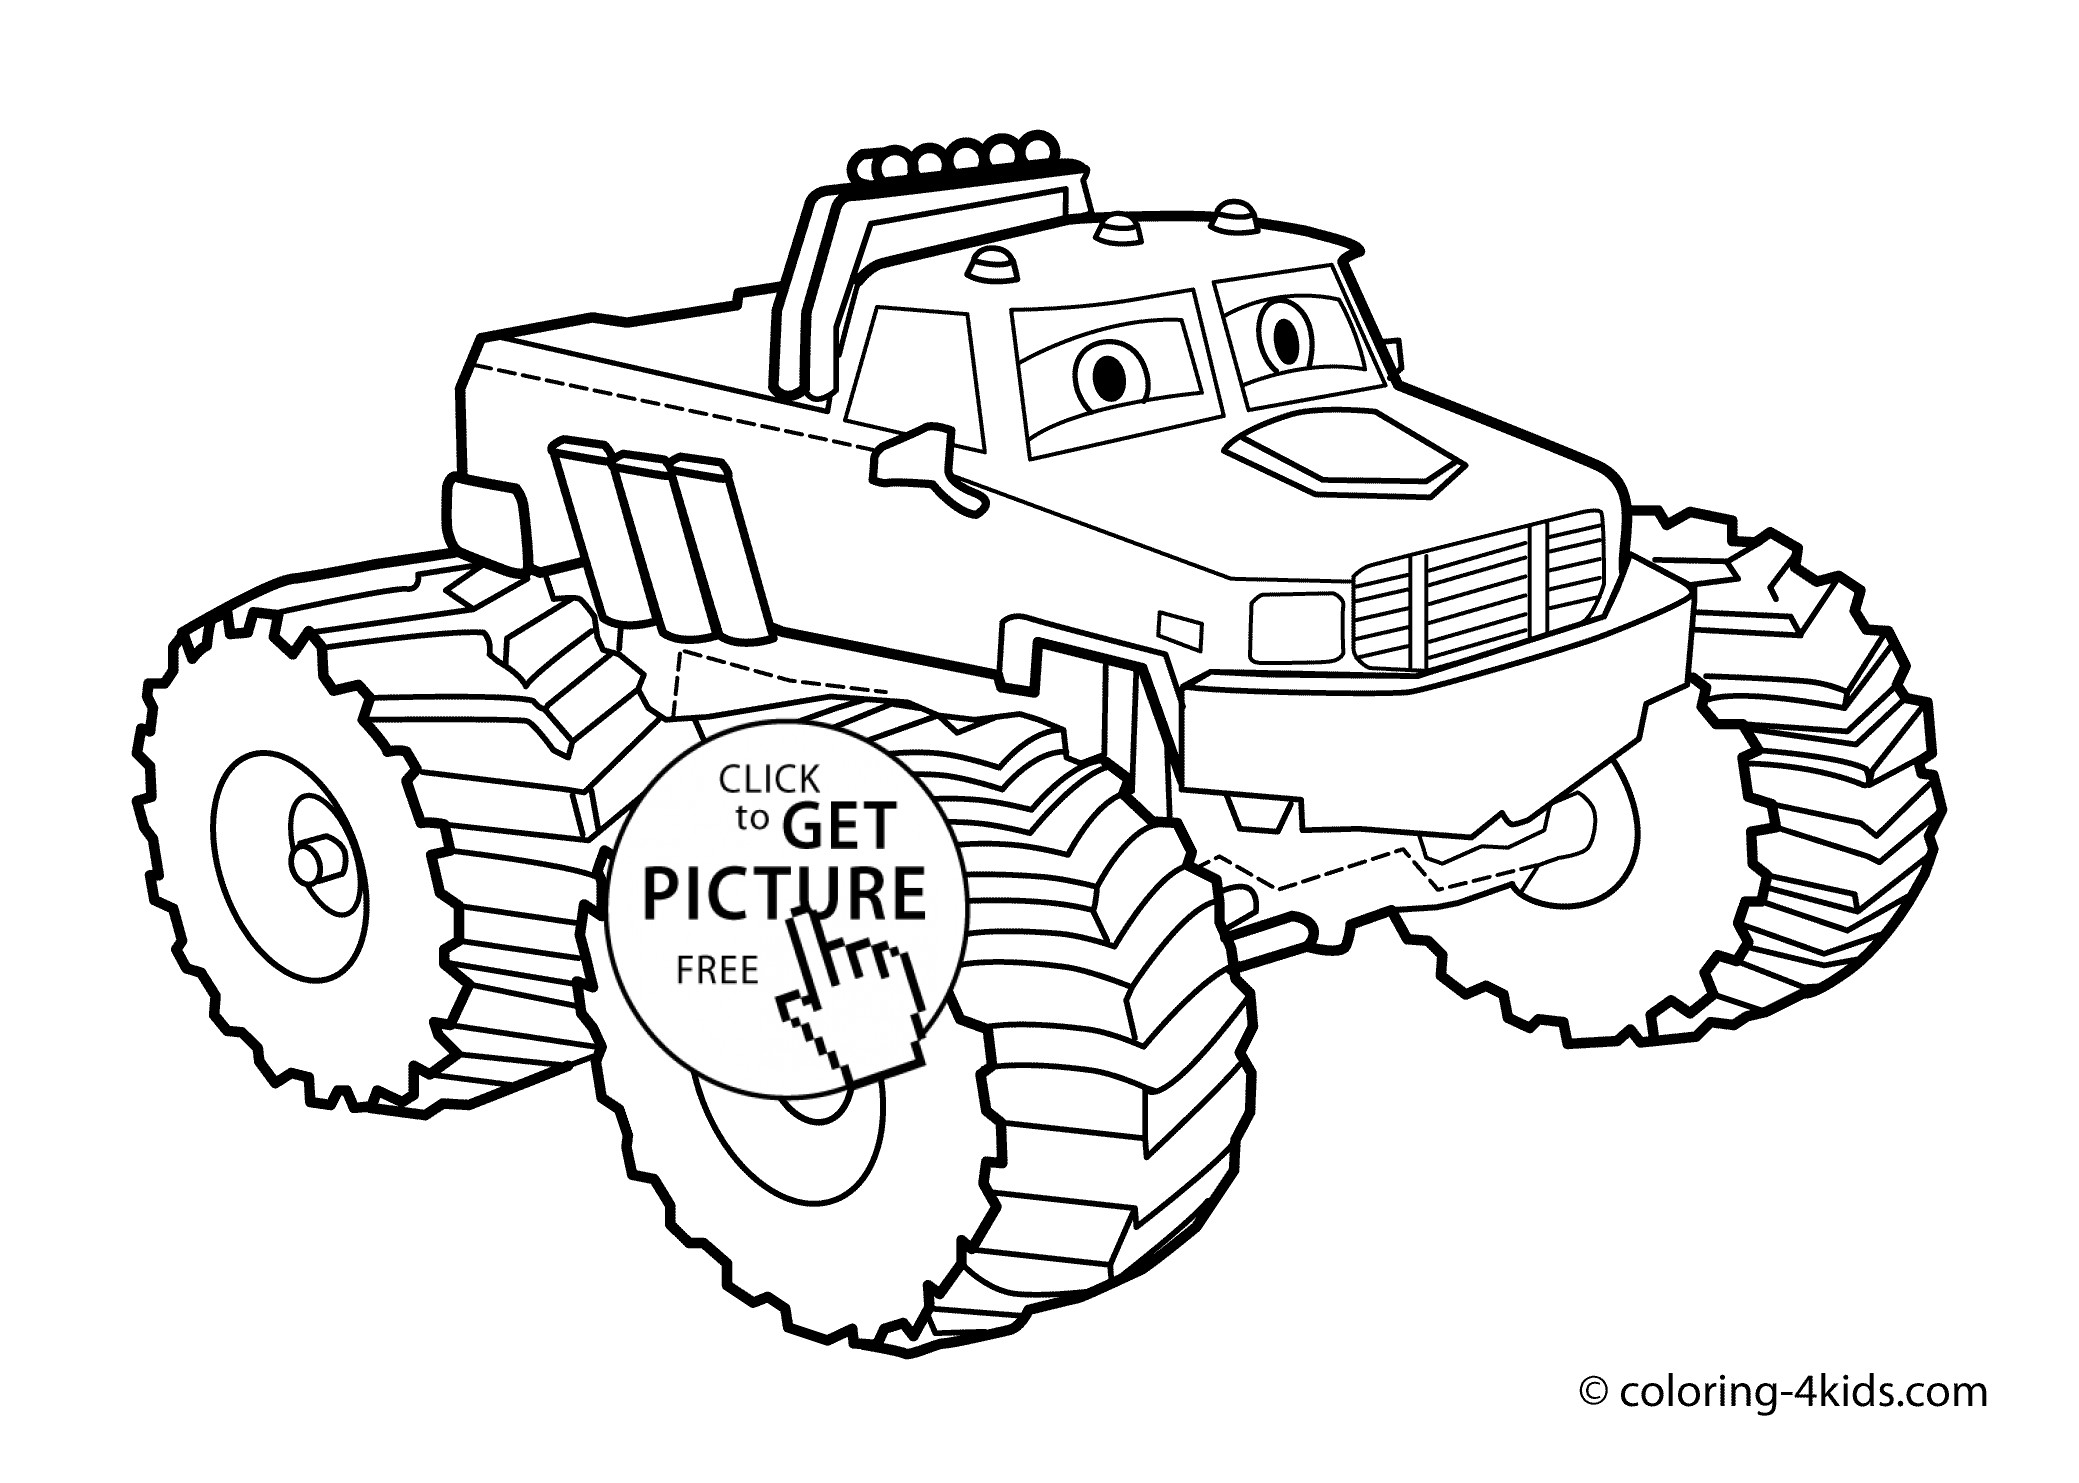 Lifted Truck Coloring Pages at GetColorings.com | Free printable colorings pages to print and color